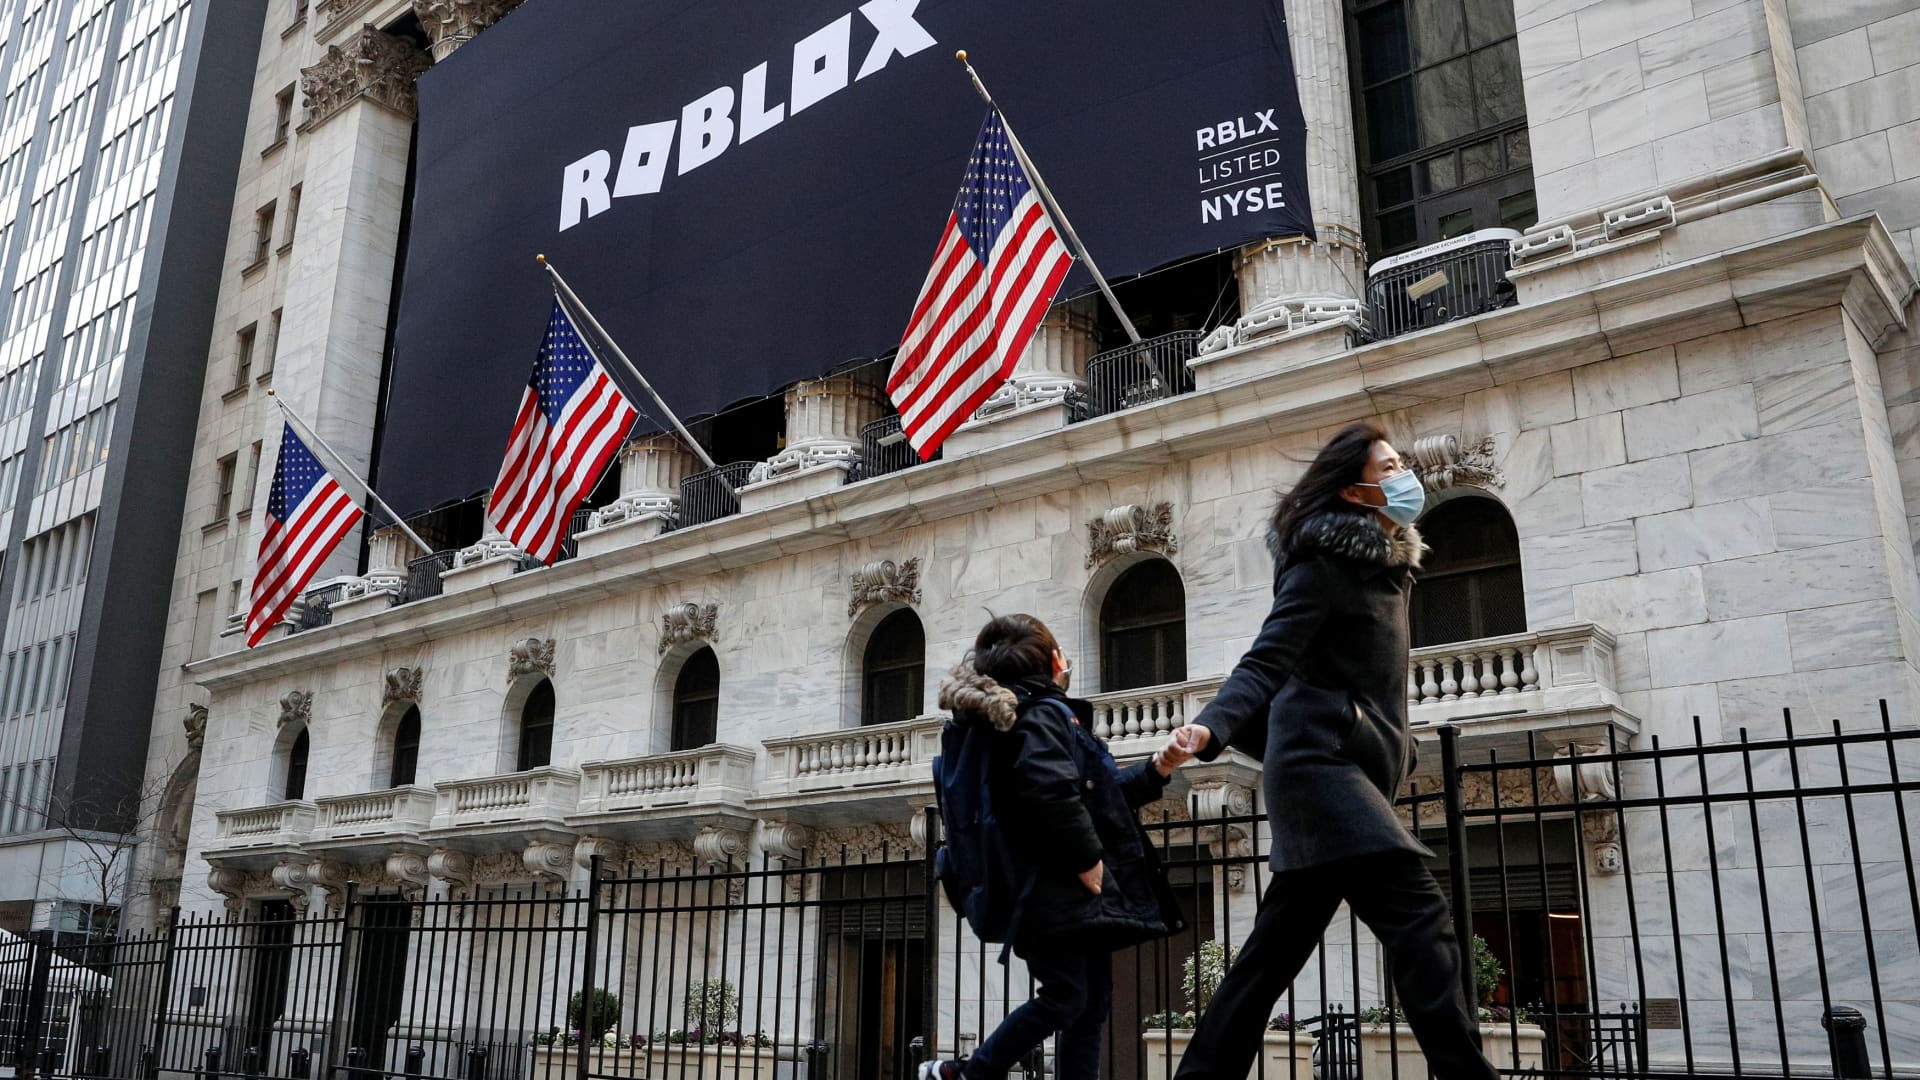 Bloxy News on X: JUST IN: Roblox Corporation (NYSE: $RBLX) has released  their Fourth Quarter 2021 Financial Highlights, Full Fiscal Year 2021  Financial Highlights, and January 2022 Key Metric Estimates.    /